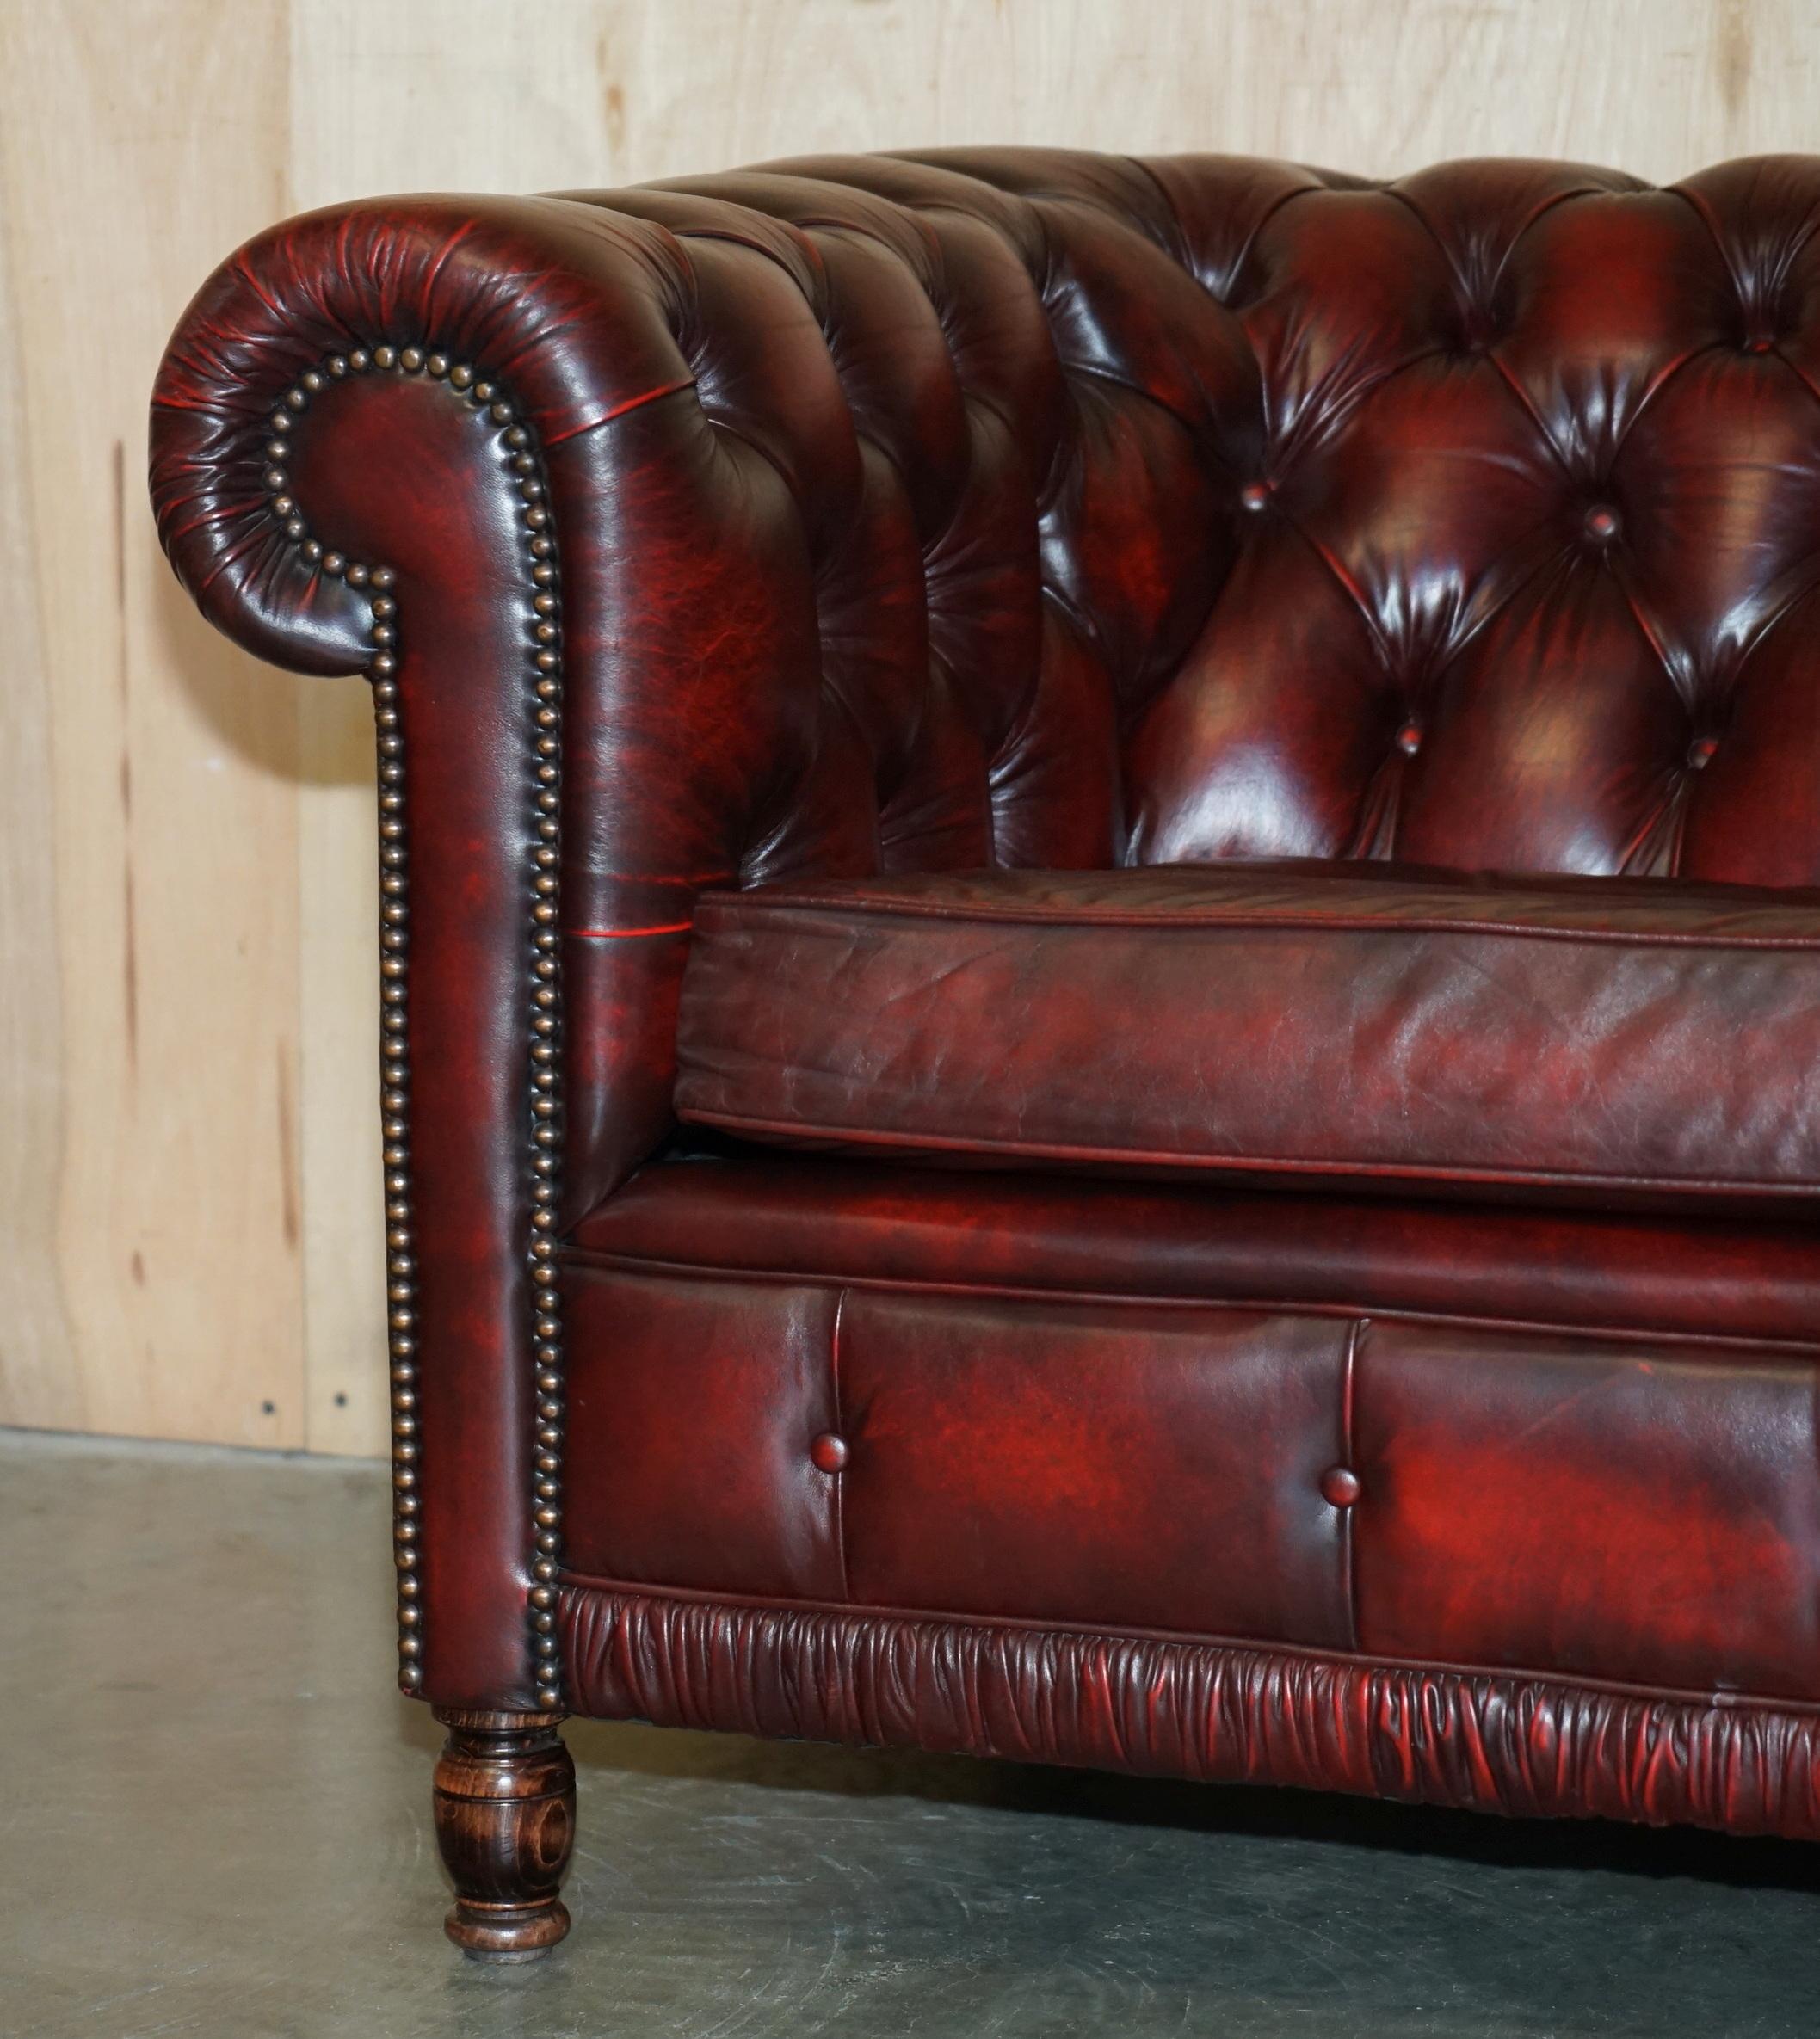 English PAIR OF ViNTAGE OXBLOOD LEATHER CHESTERFIELD CLUB ARMCHAIRS WITH ELEGANT LEGS